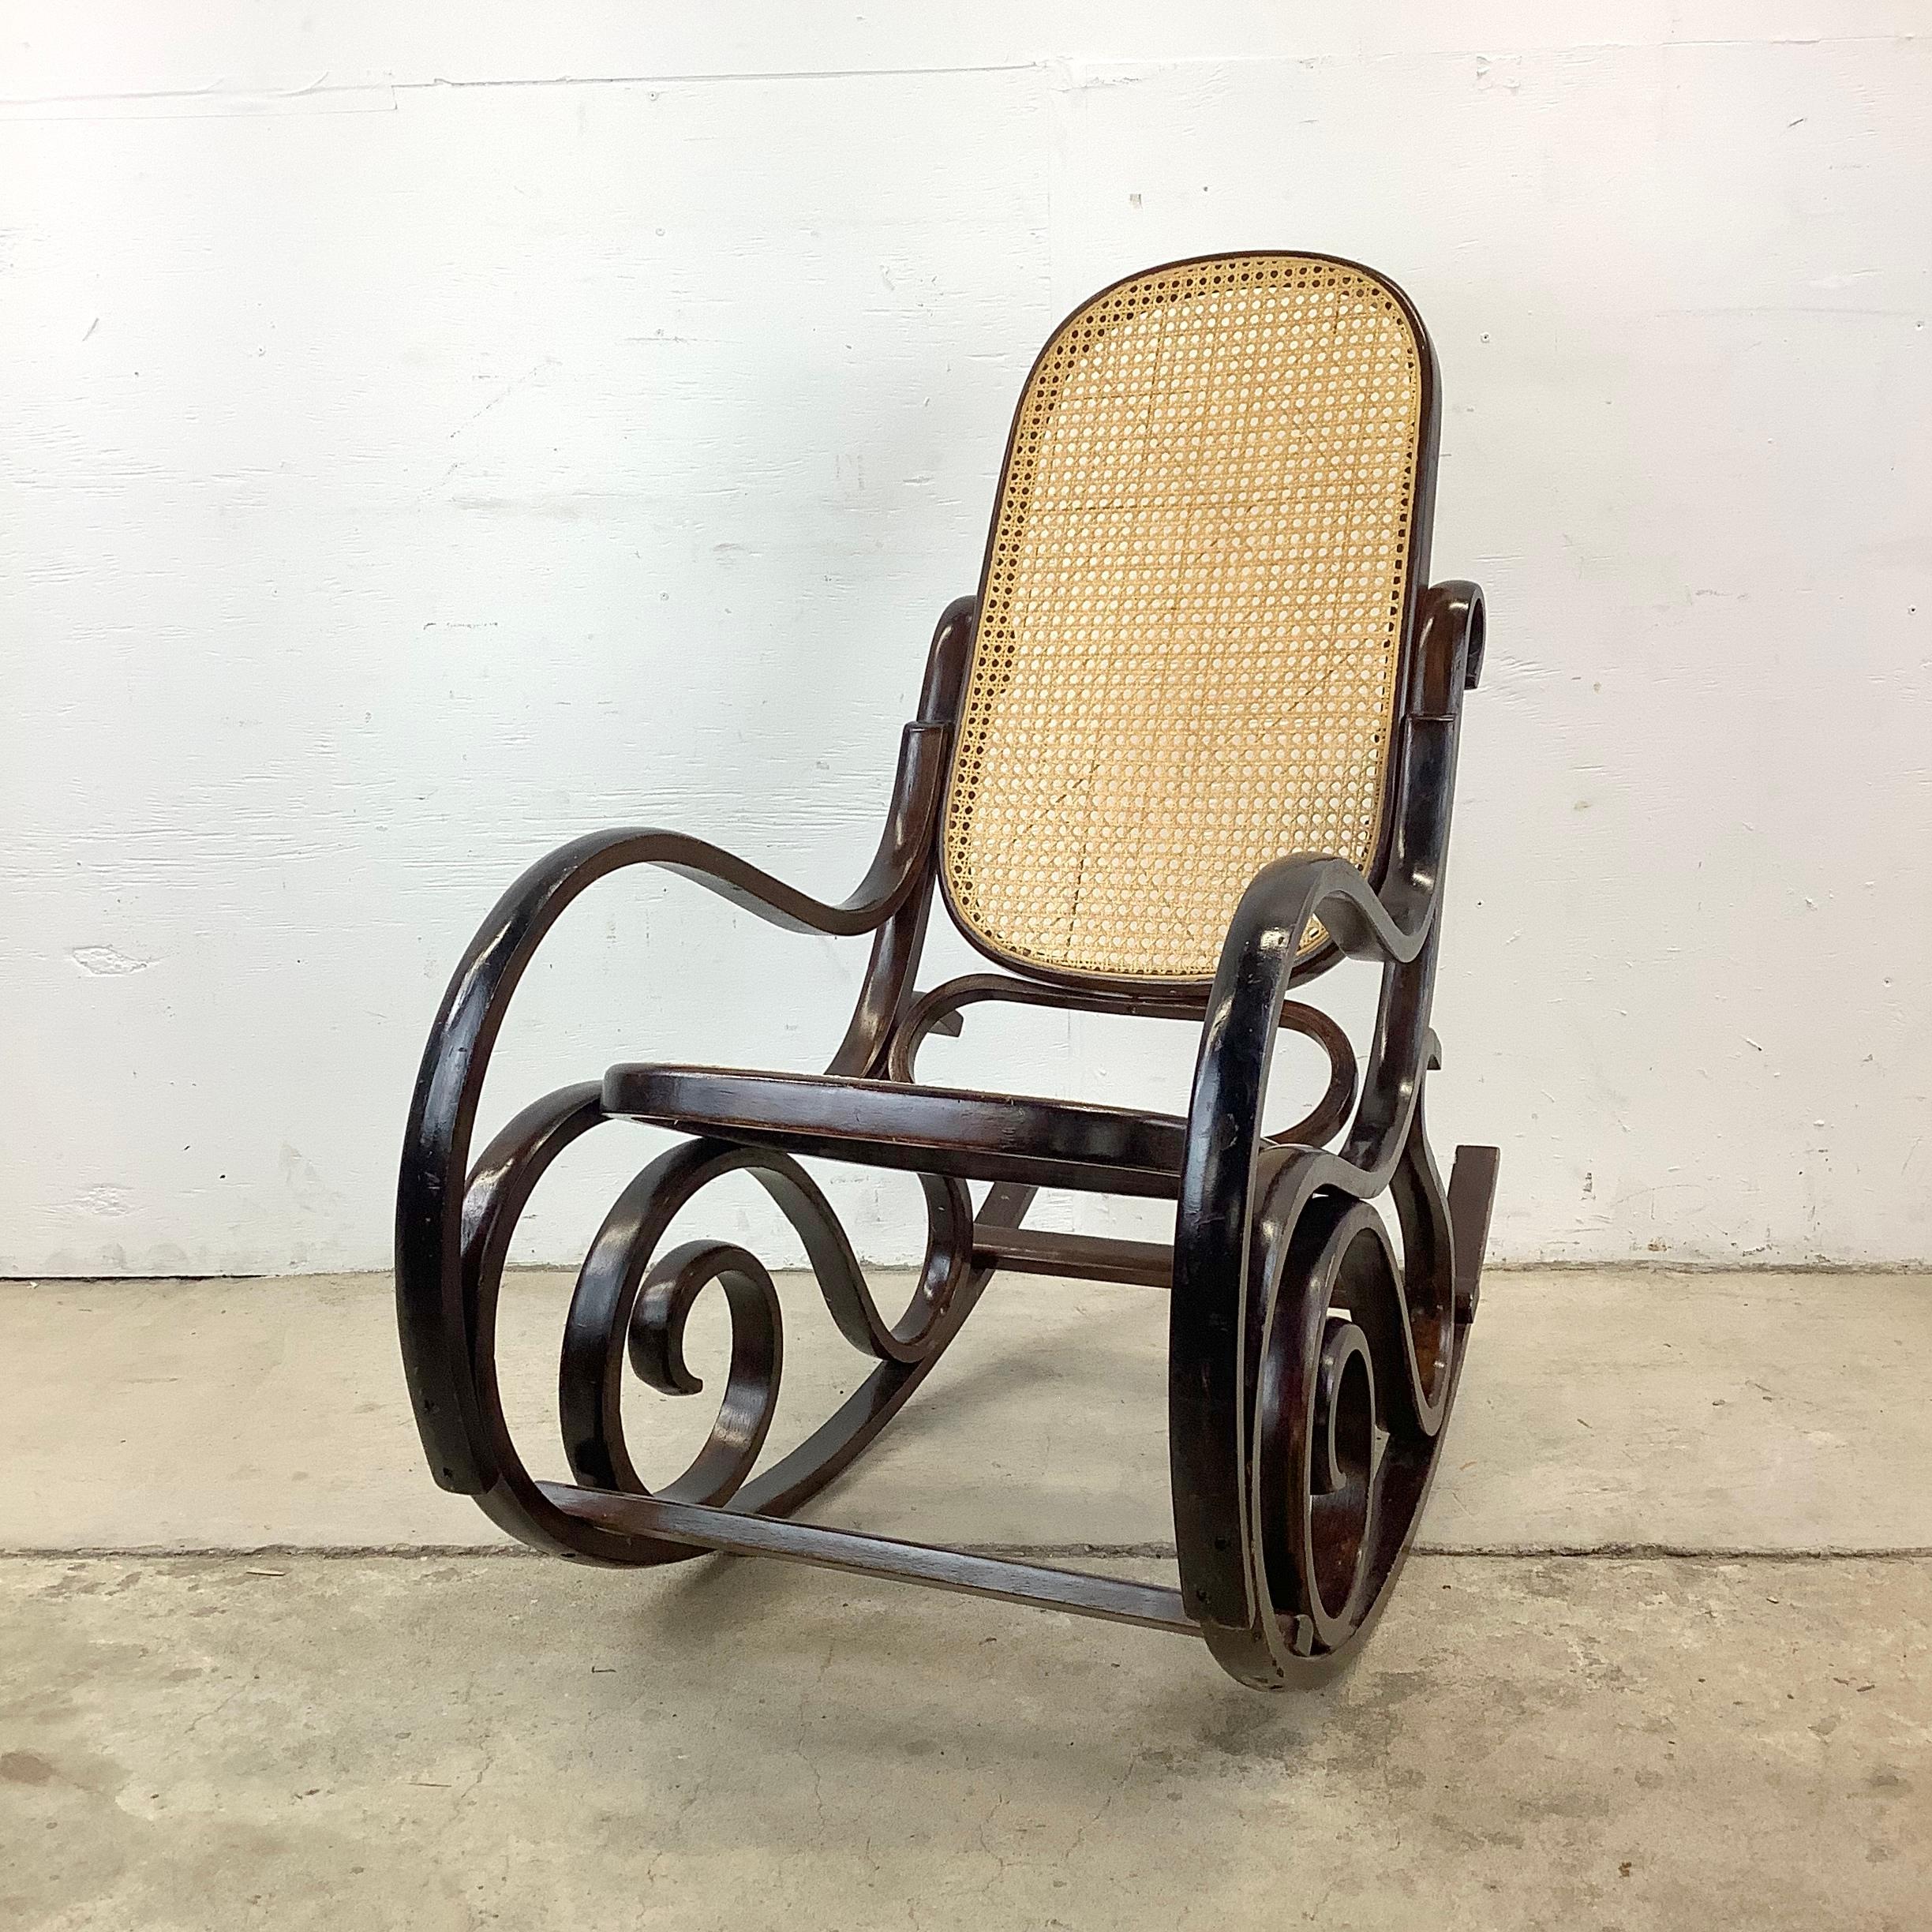 This Vintage Cane Seat Rocking Chair with Bentwood frame is inspired by the timeless elegance of early Thonet furniture. Crafted with meticulous attention to detail, this rocking chair pays homage to the iconic designs of Michael Thonet, renowned